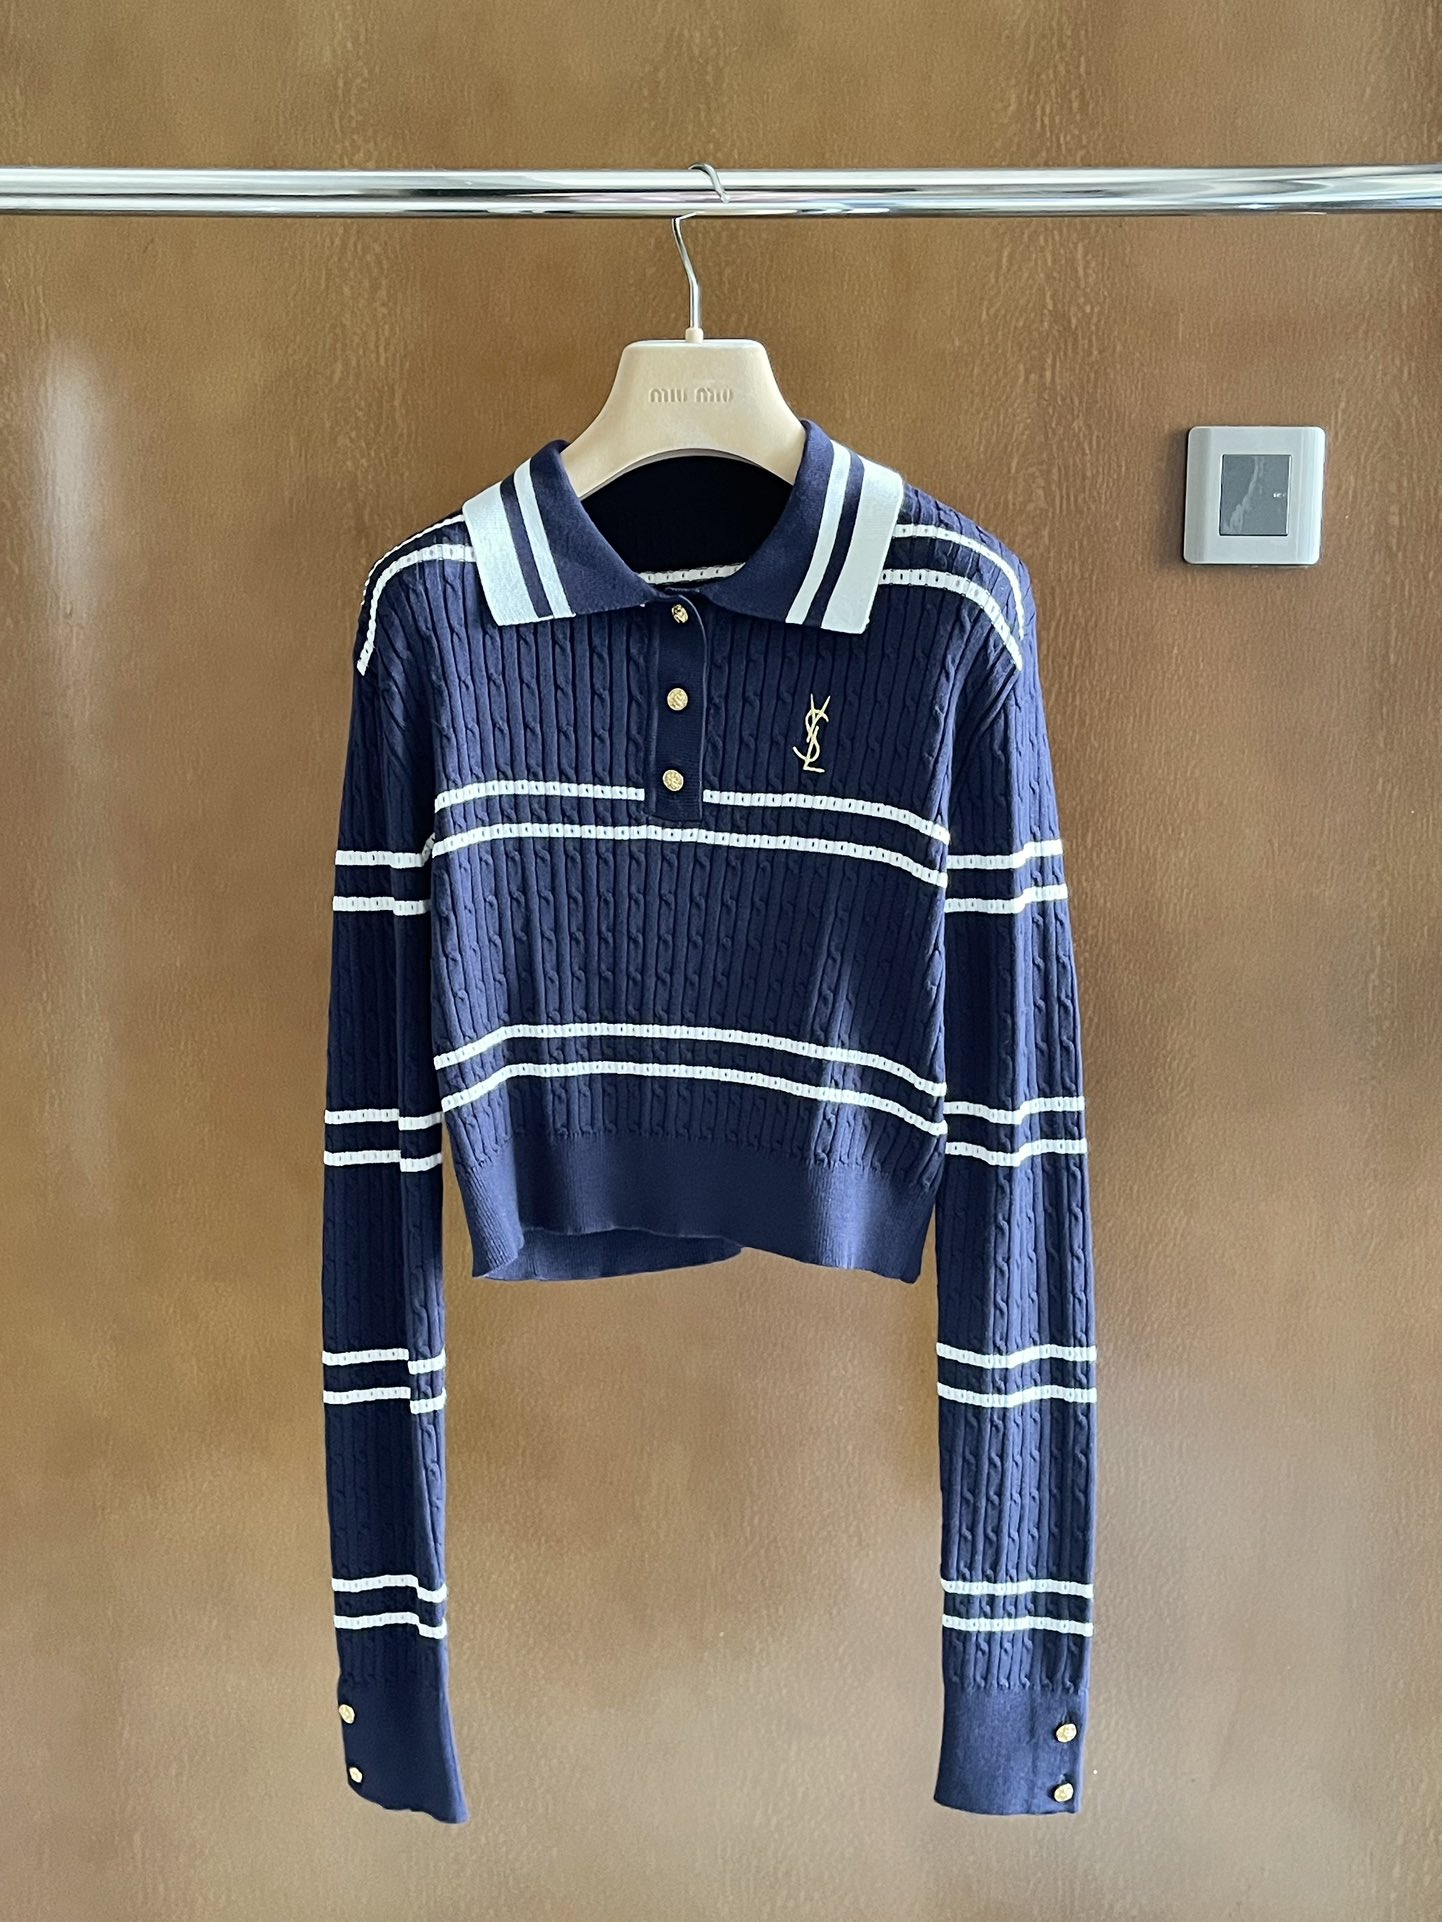 Yves Saint Laurent Clothing Knit Sweater Best AAA+
 Embroidery Knitting Fall Collection Vintage